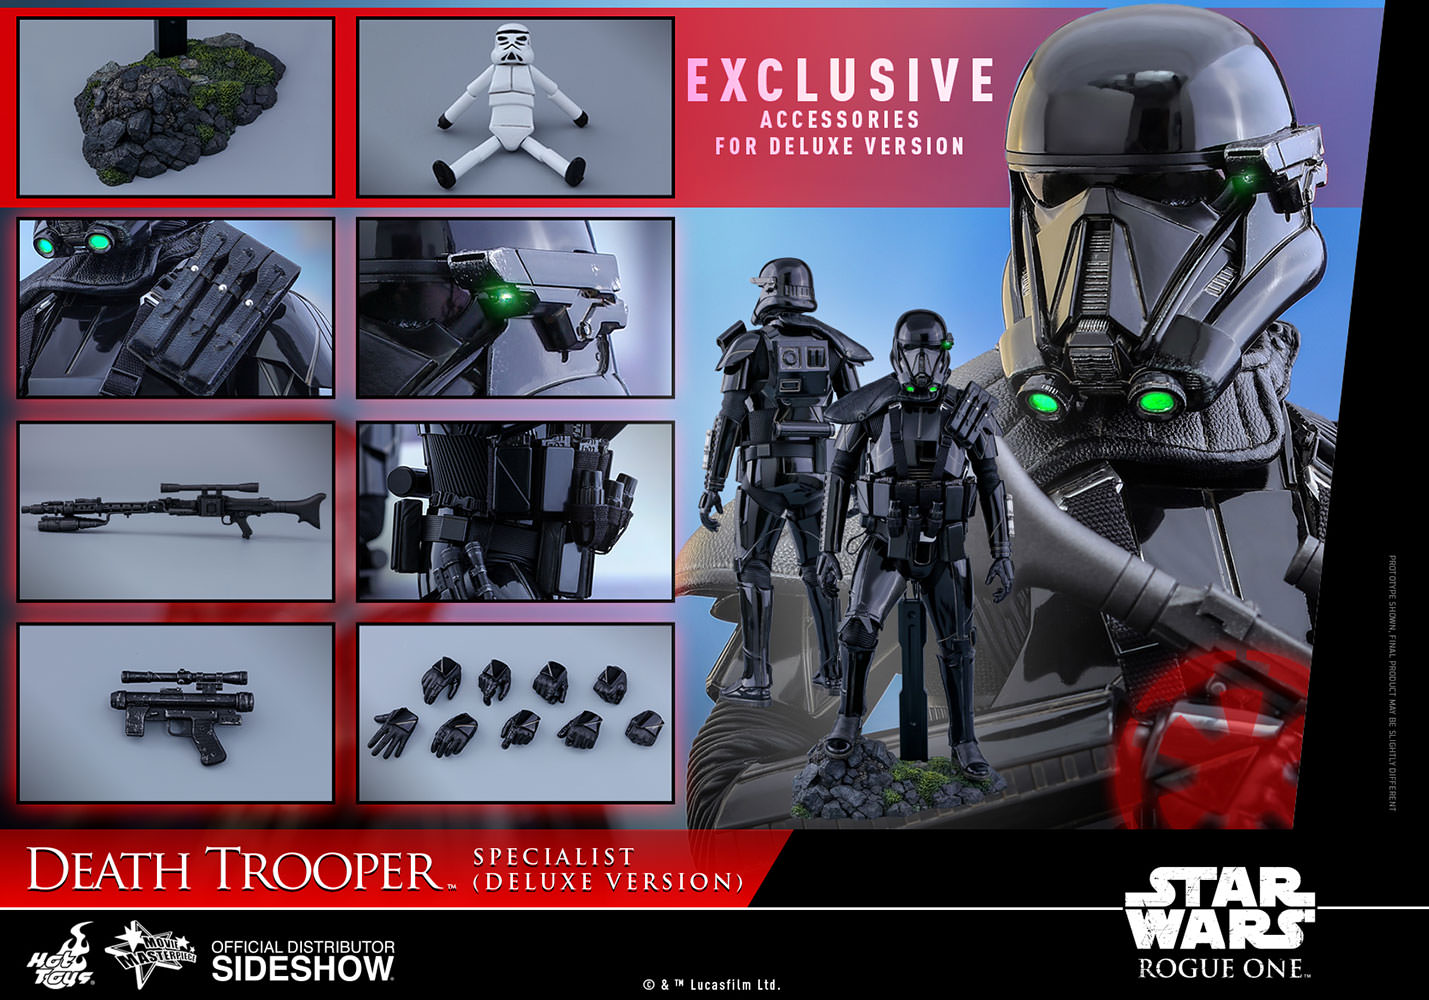 star-wars-rogue-one-death-trooper-specialist-deluxe-version-hot-toys-feature-ht-product-902906-15